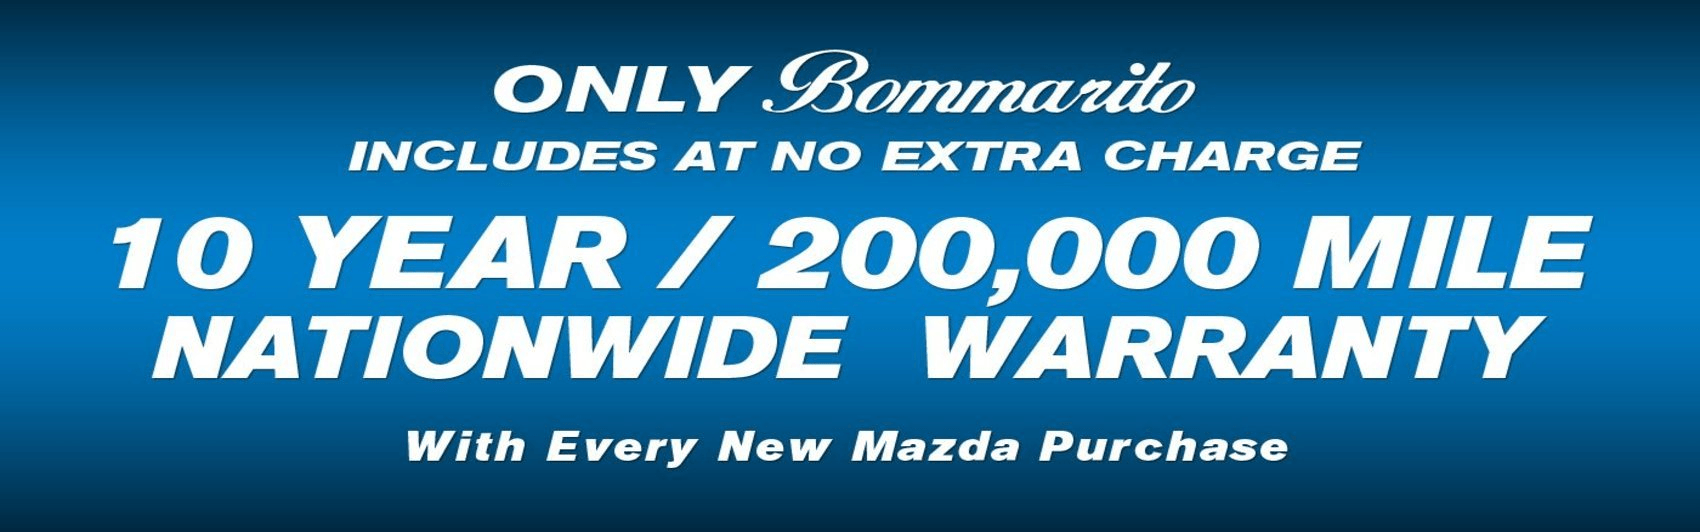 Mazda Dealership | Used Cars in St. Louis, MO | Bommarito Mazda South County